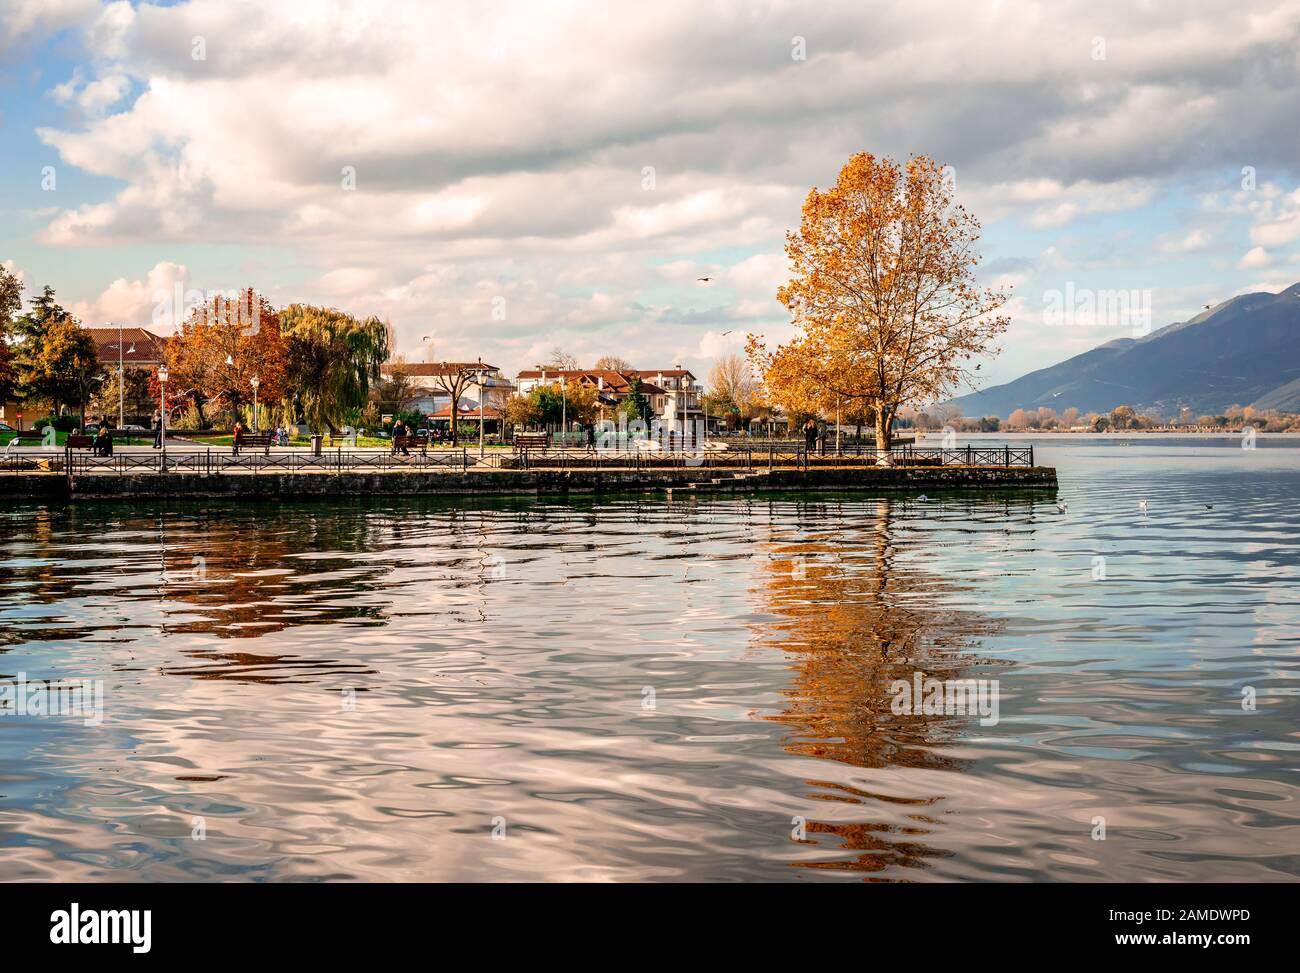 Ioannina / Greece - November 23 2019: View of lake Pamvotis and the waterfront of the city of Ioannina. Stock Photo